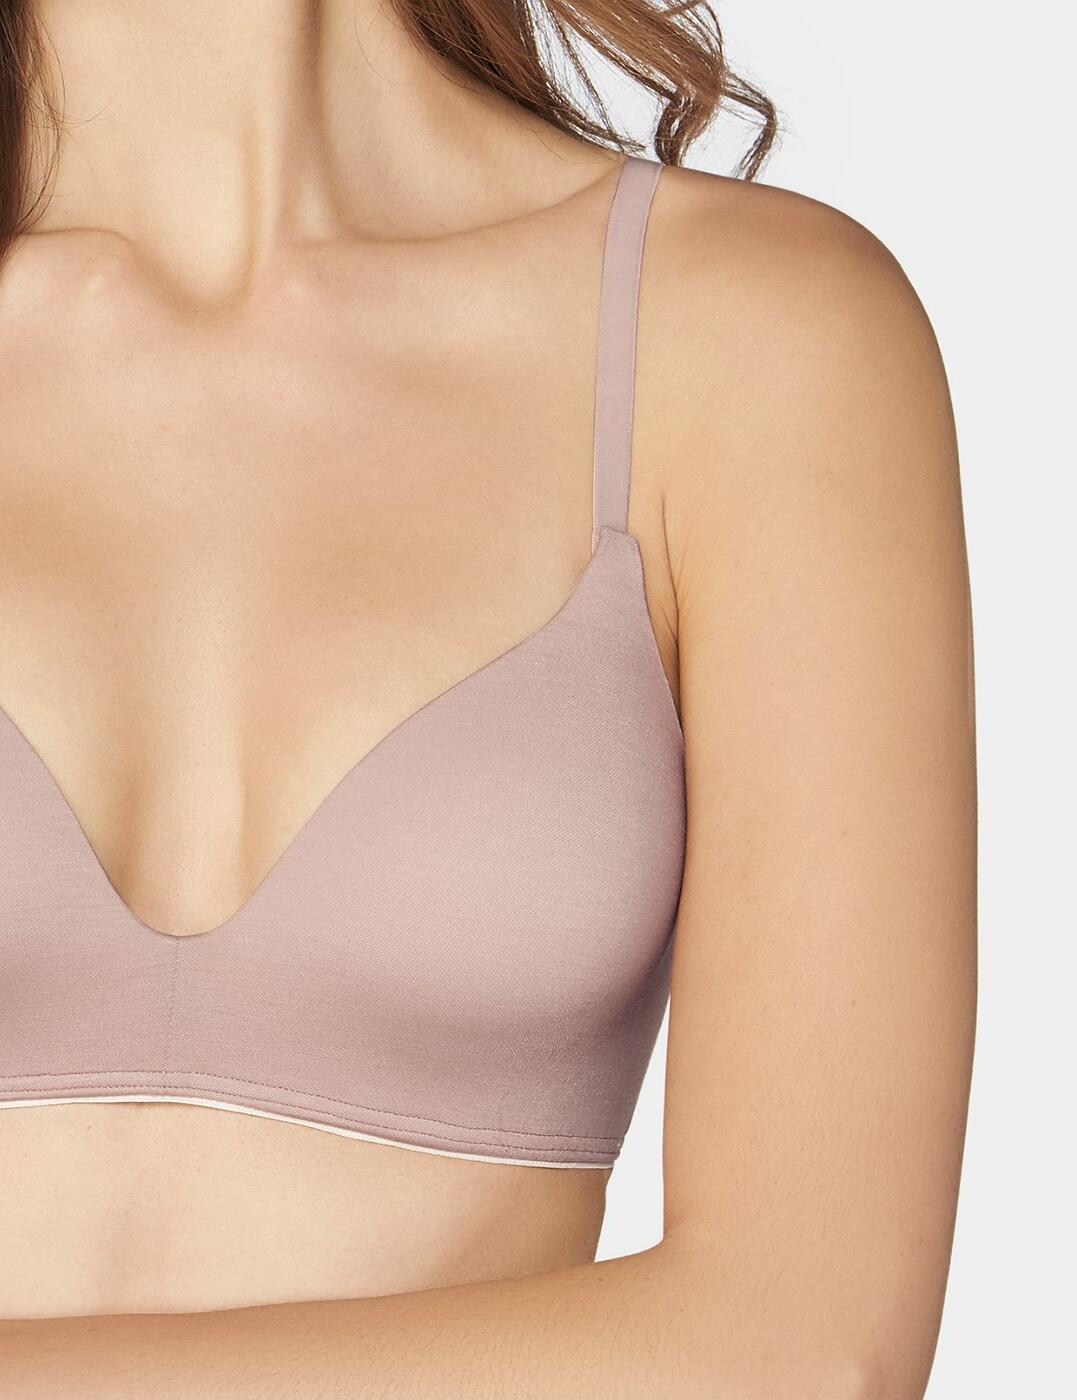 Details about   Sloggi Wow Comfort Bra 10178488 Non-Wired Push-Up T-Shirt Bra Baroque Rose 